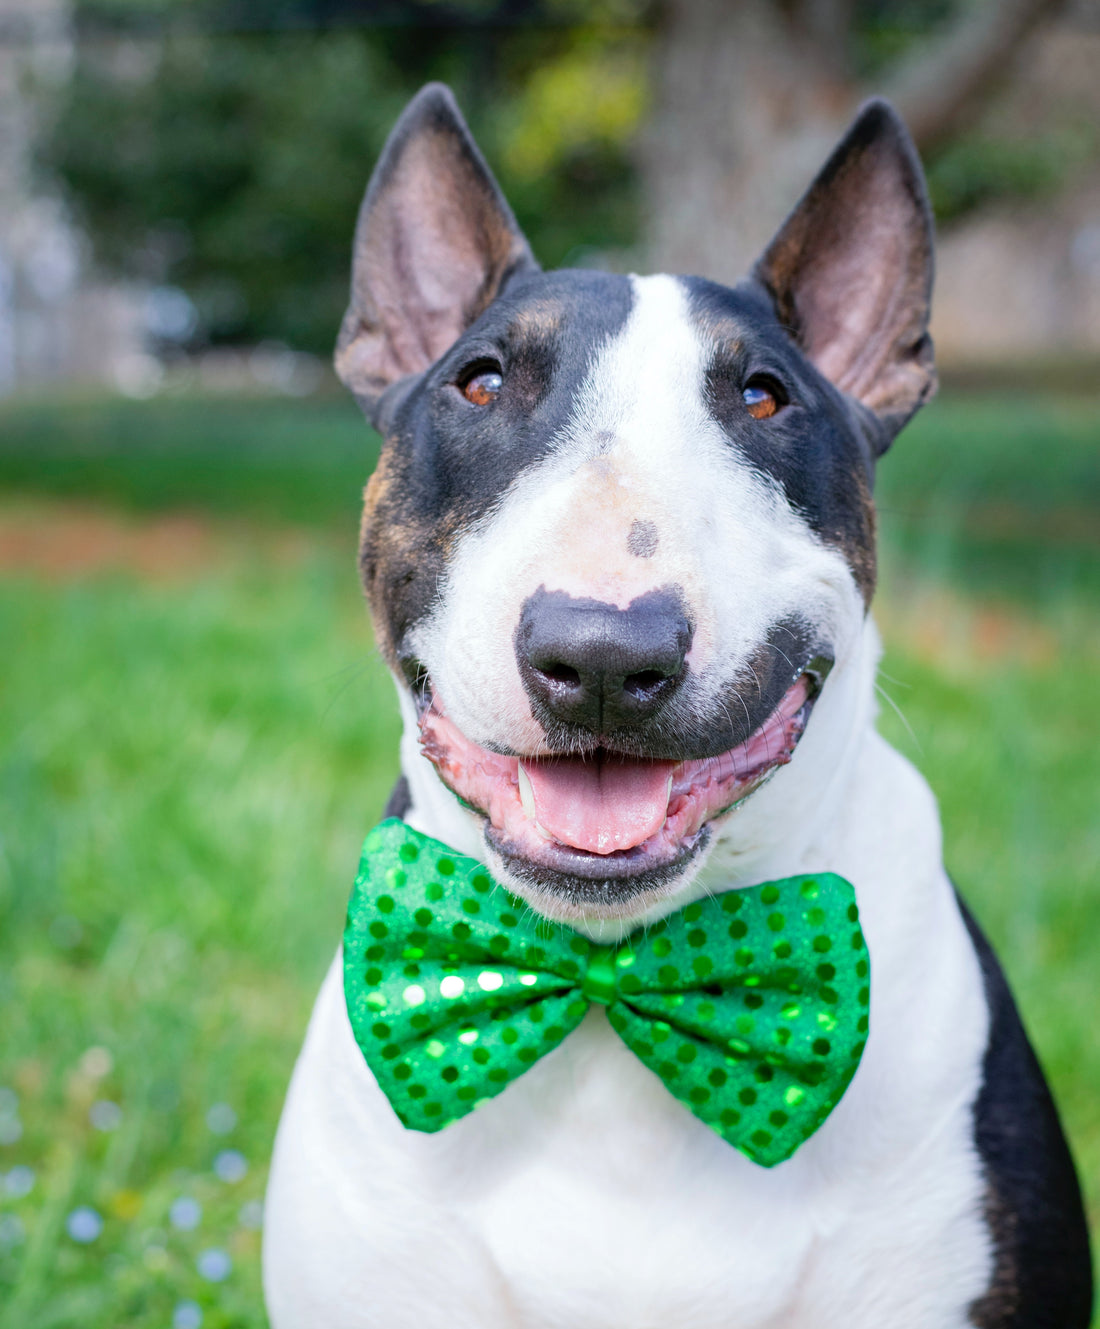 Pet Safety Tips for St. Patrick's Day You Need to Know